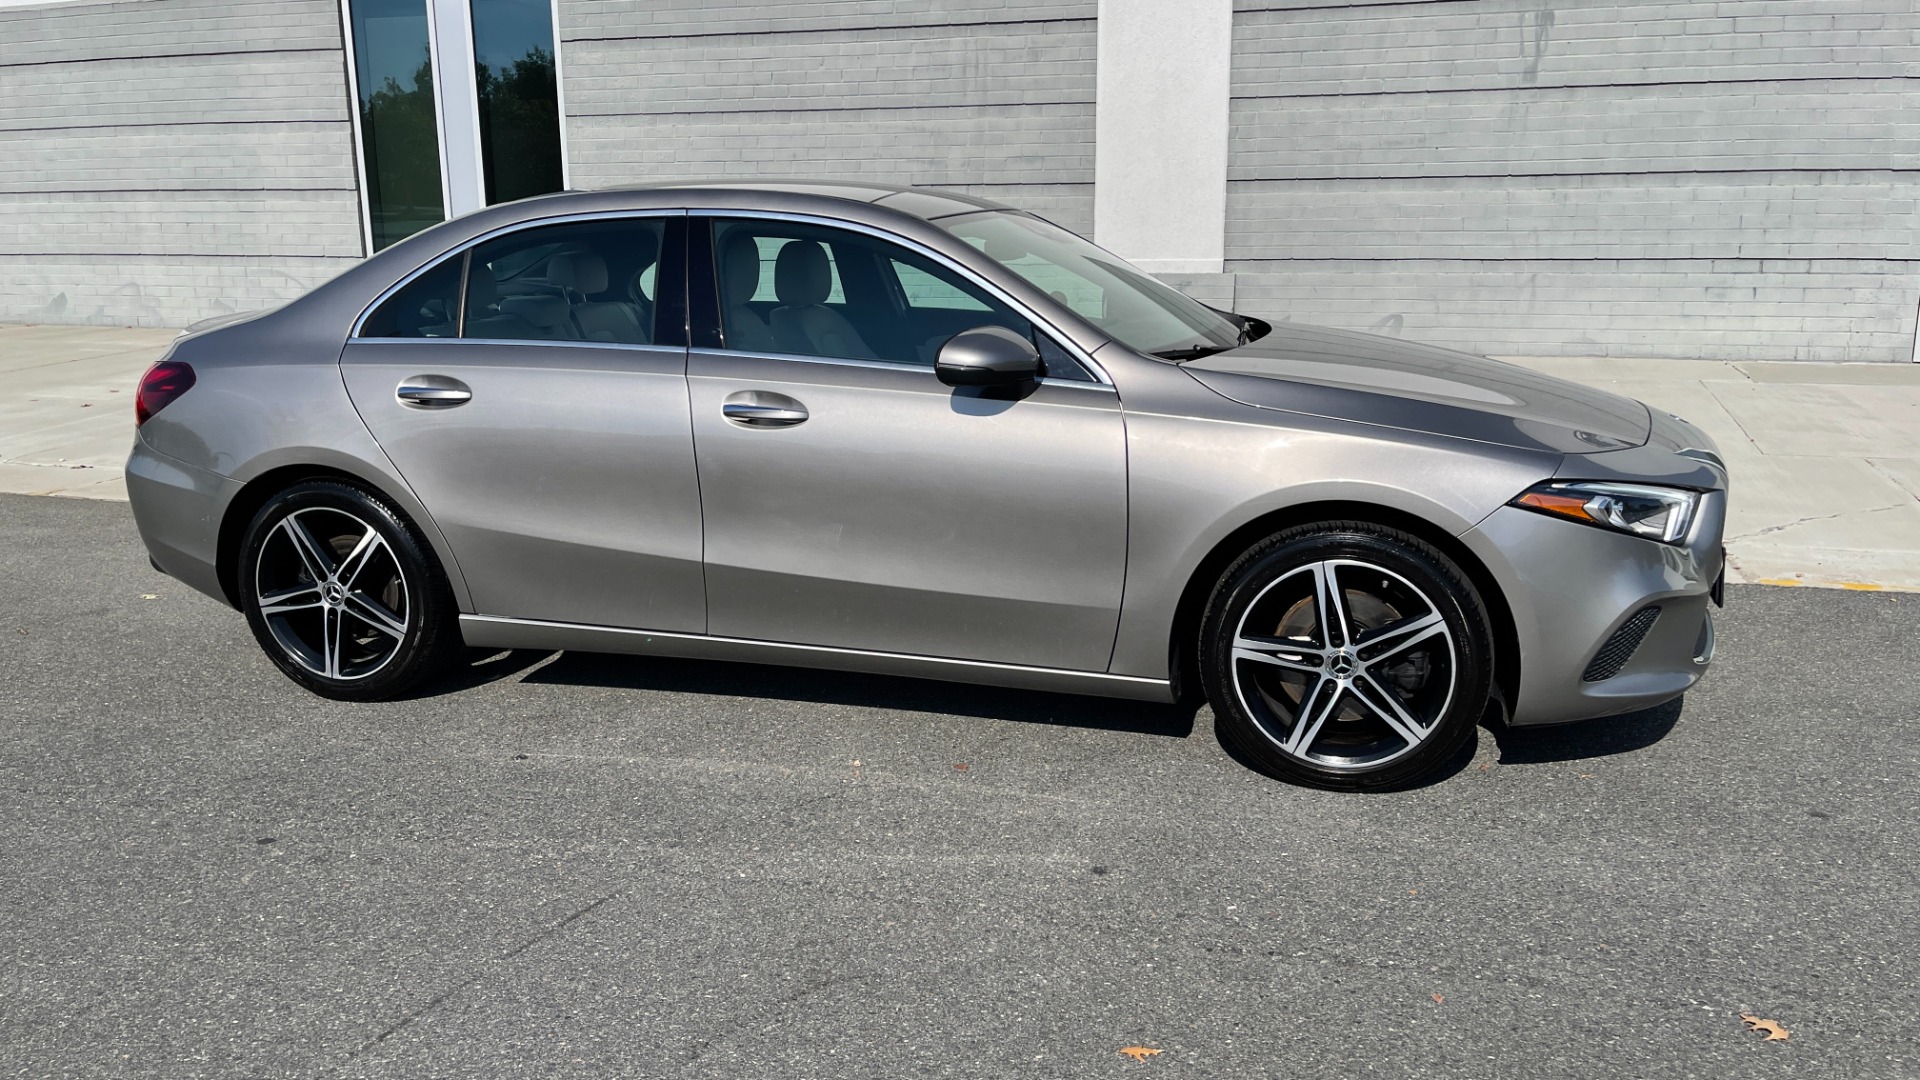 Used 2019 Mercedes-Benz A-Class A220 / PREMIUM / AMBIENT LIGHTING / BLIND SPOT / WIRELESS CHARGING for sale $30,599 at Formula Imports in Charlotte NC 28227 3